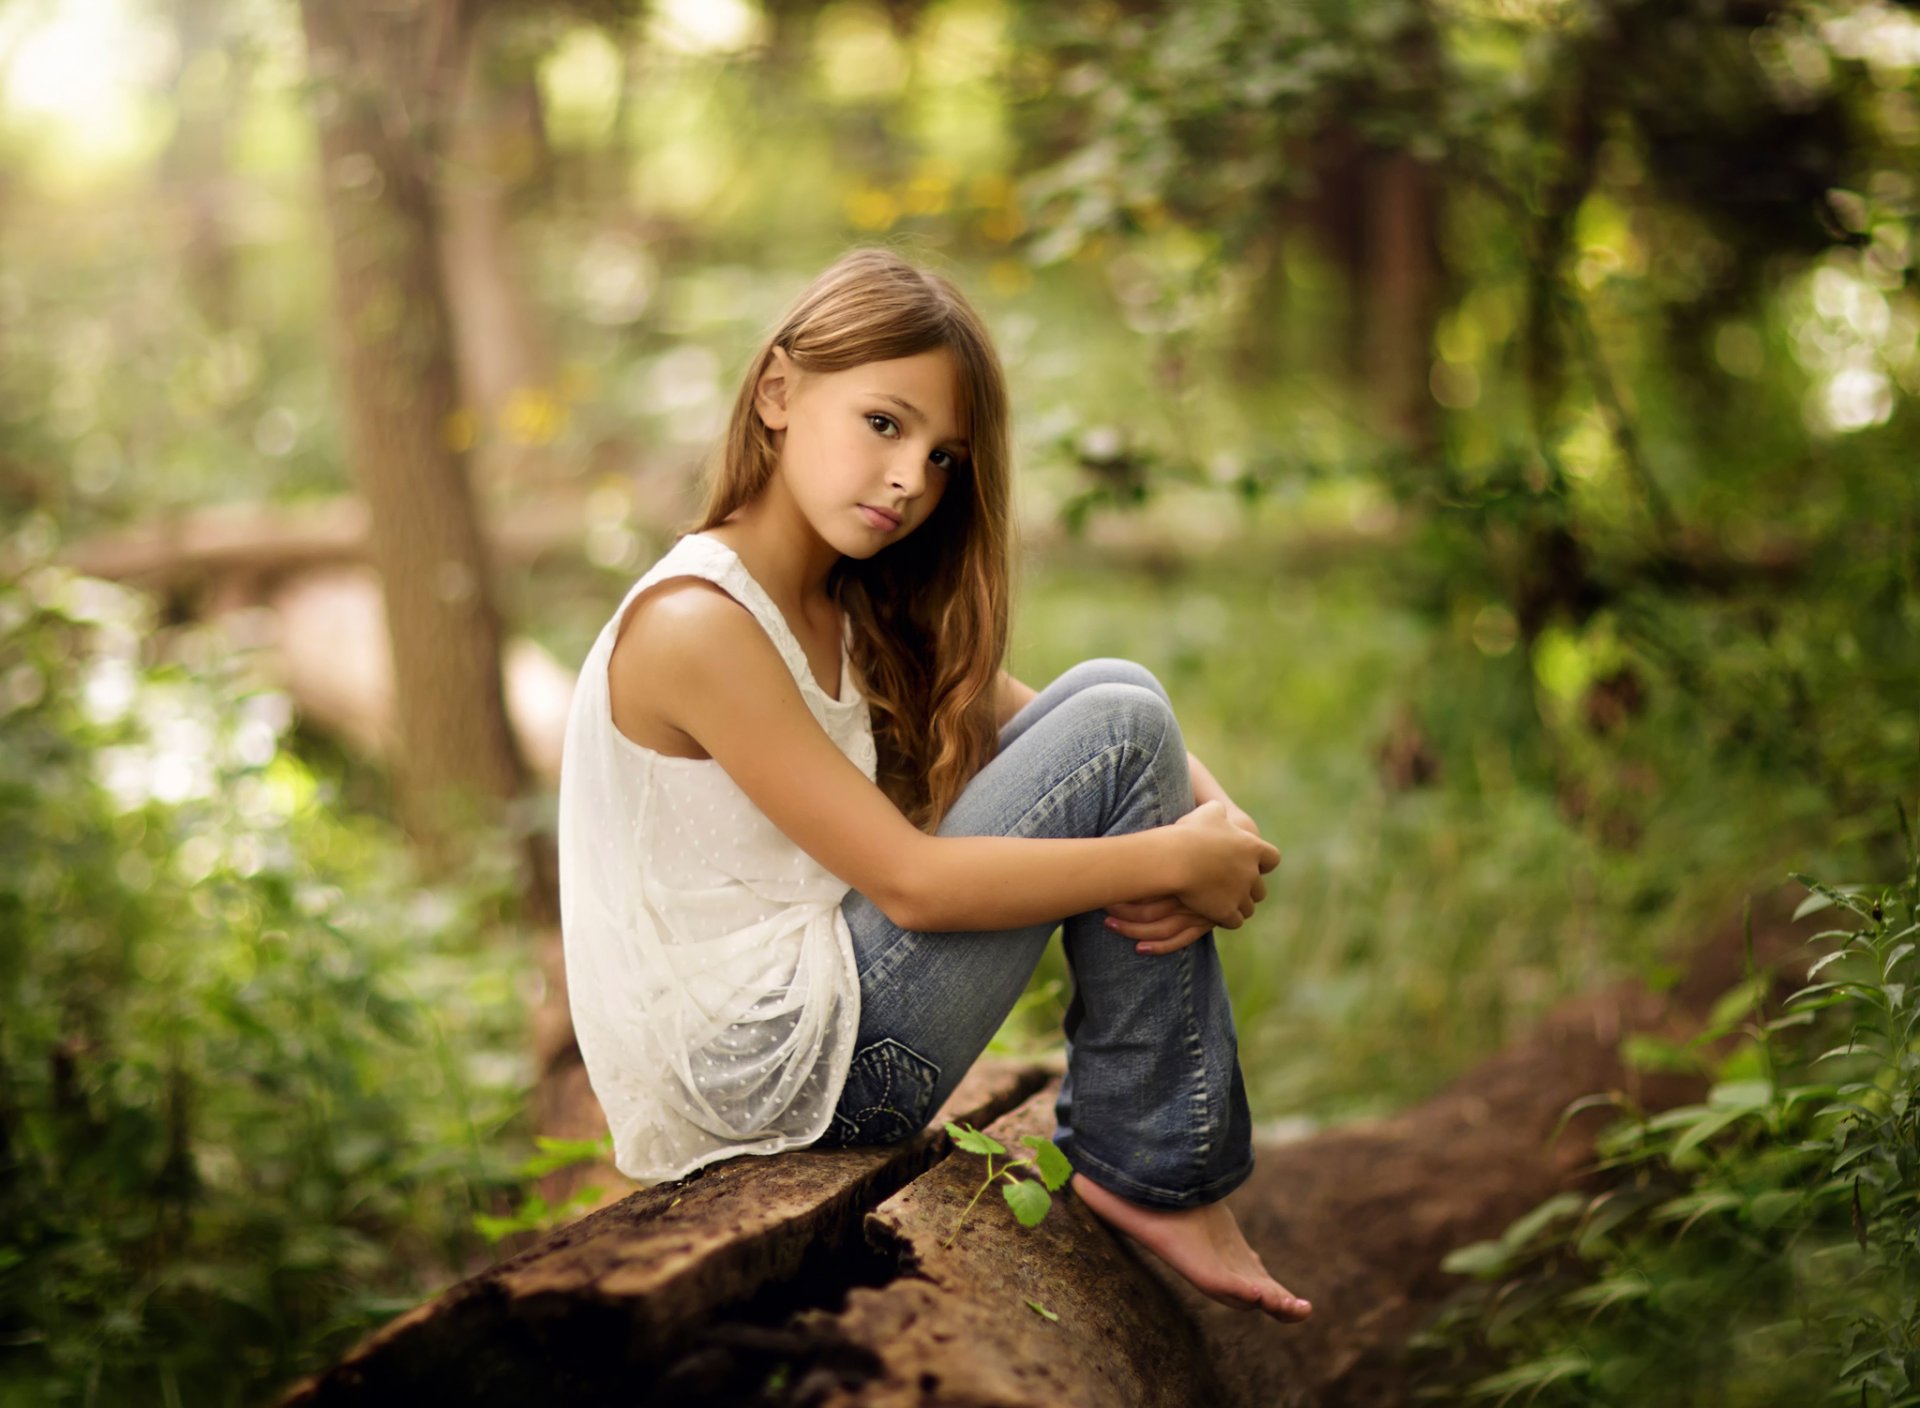 young girls wallpaper,people in nature,nature,photograph,natural environment,beauty